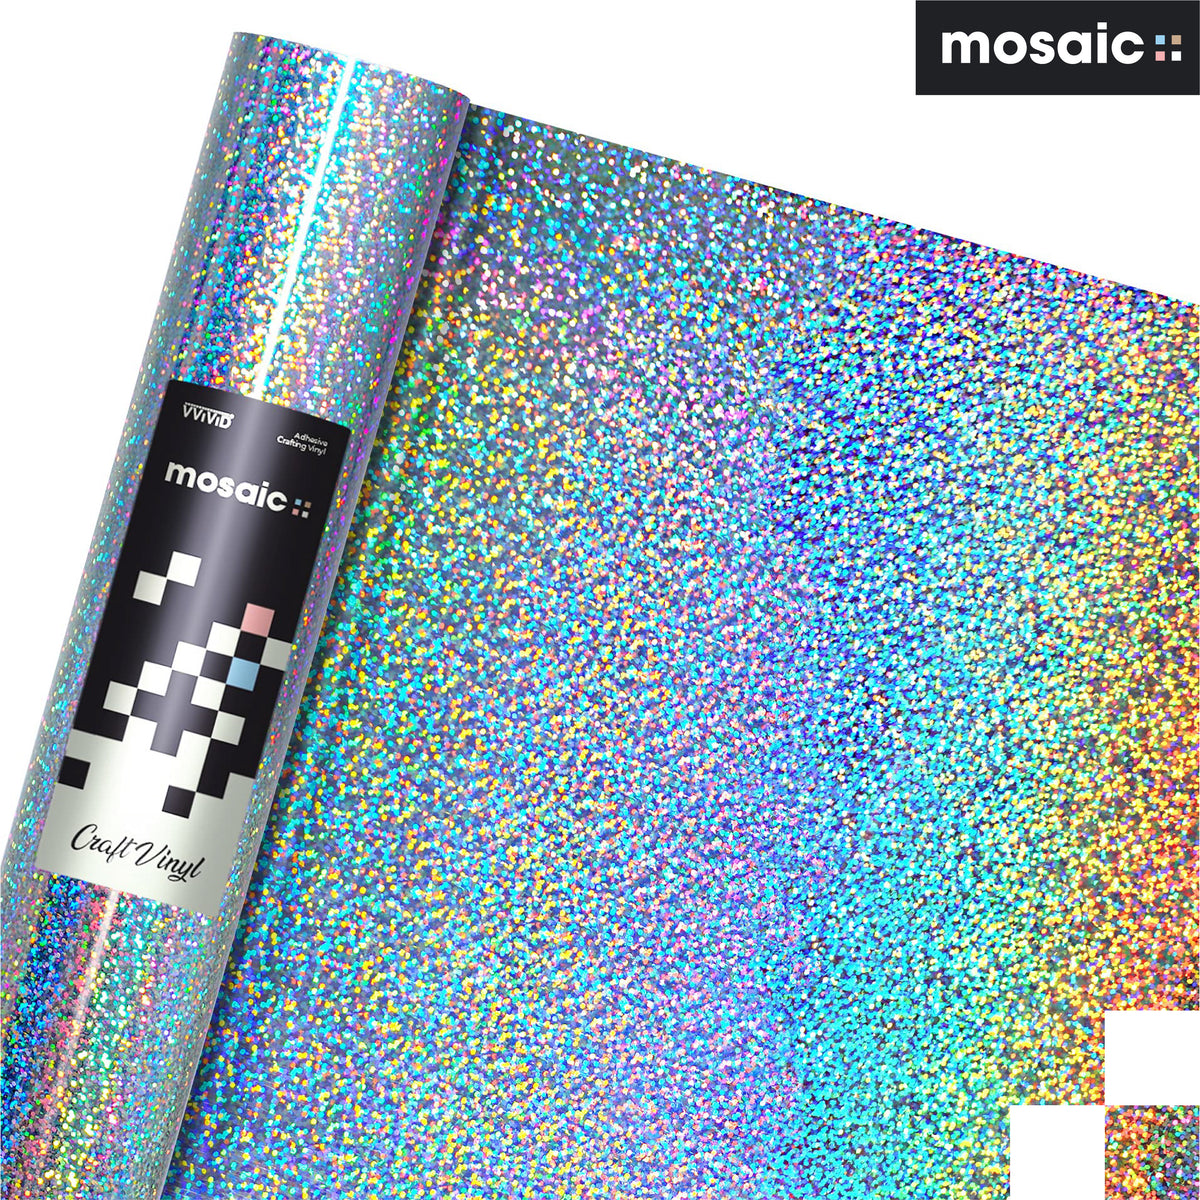 MOSAIC+ Silver Holographic Glitter — Craft Vinyl (1ft x 5ft) [MCF